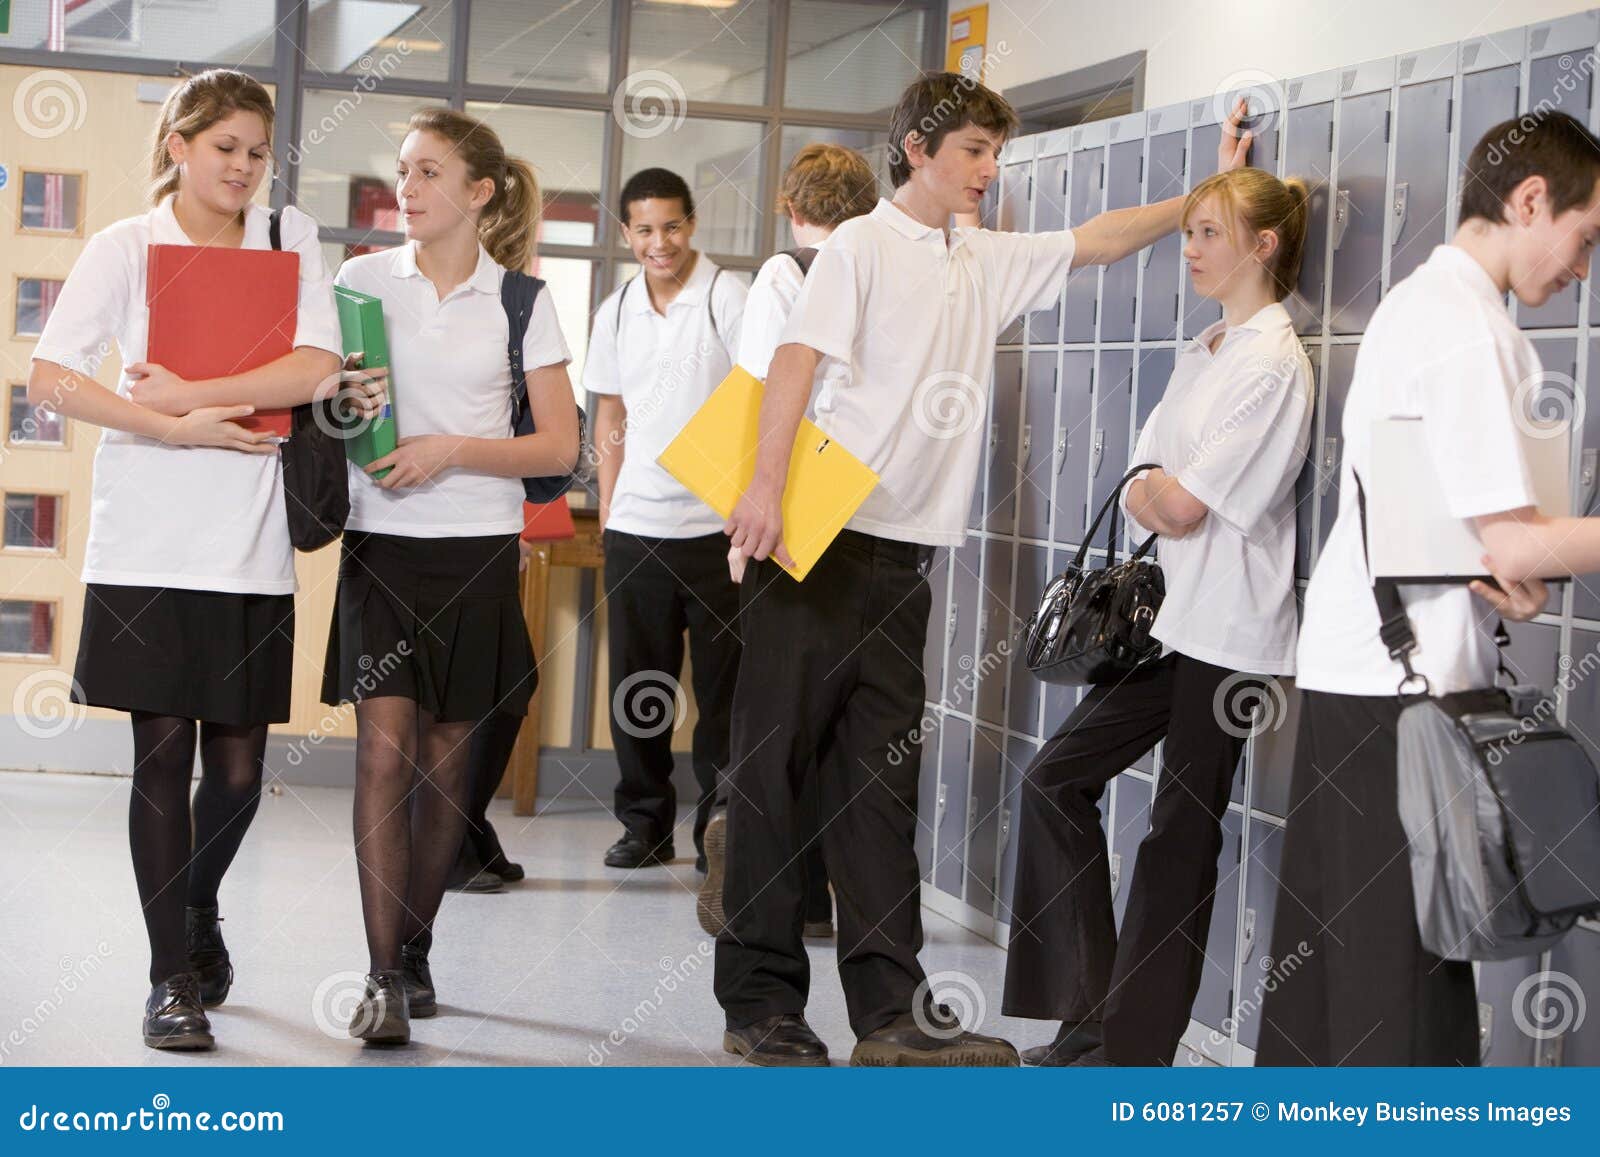 high school students by lockers